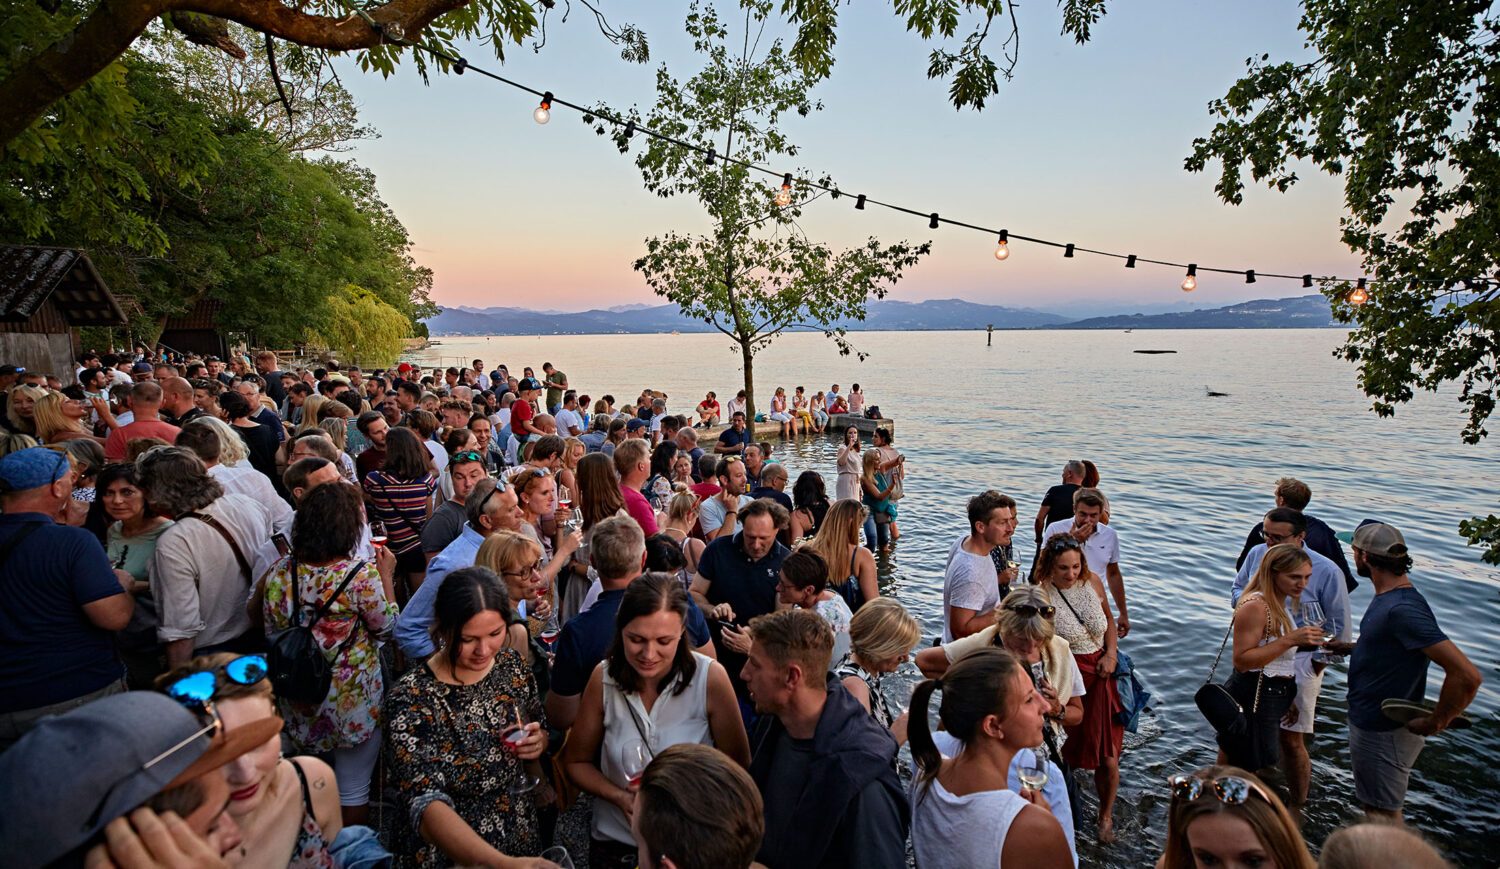 Electro beats and wine from the region - the 'Komm und See' festival is the perfect mix of both